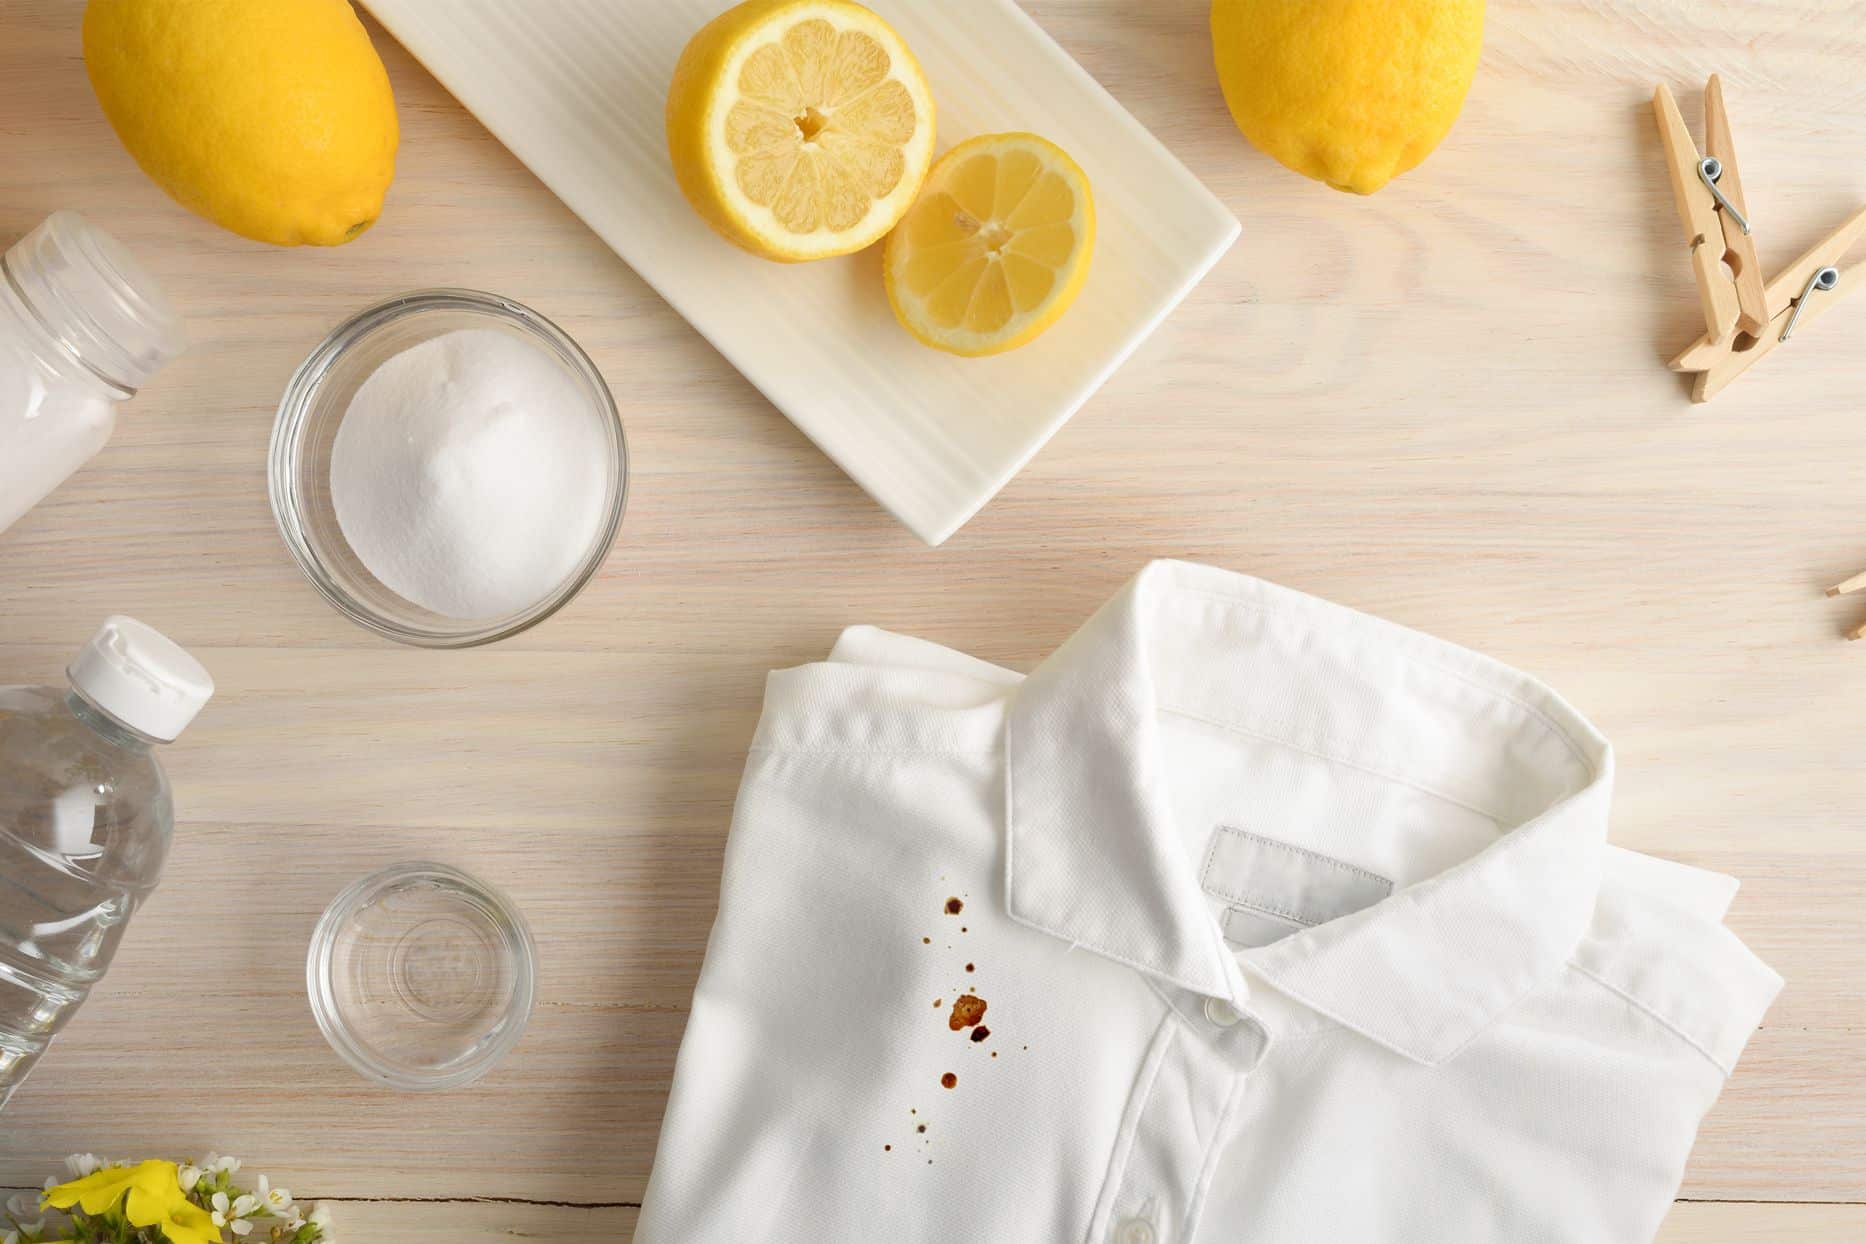 removing blood stains from clothes